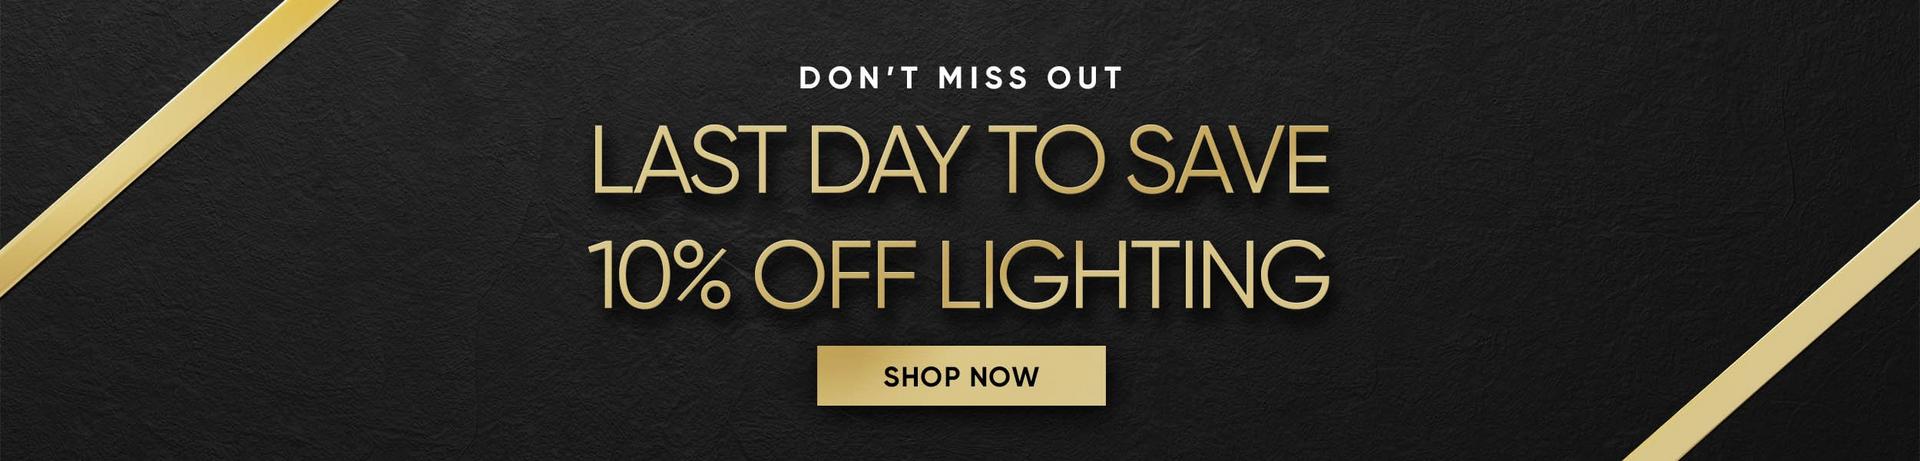 Last Day to Save 10% Off Lighting